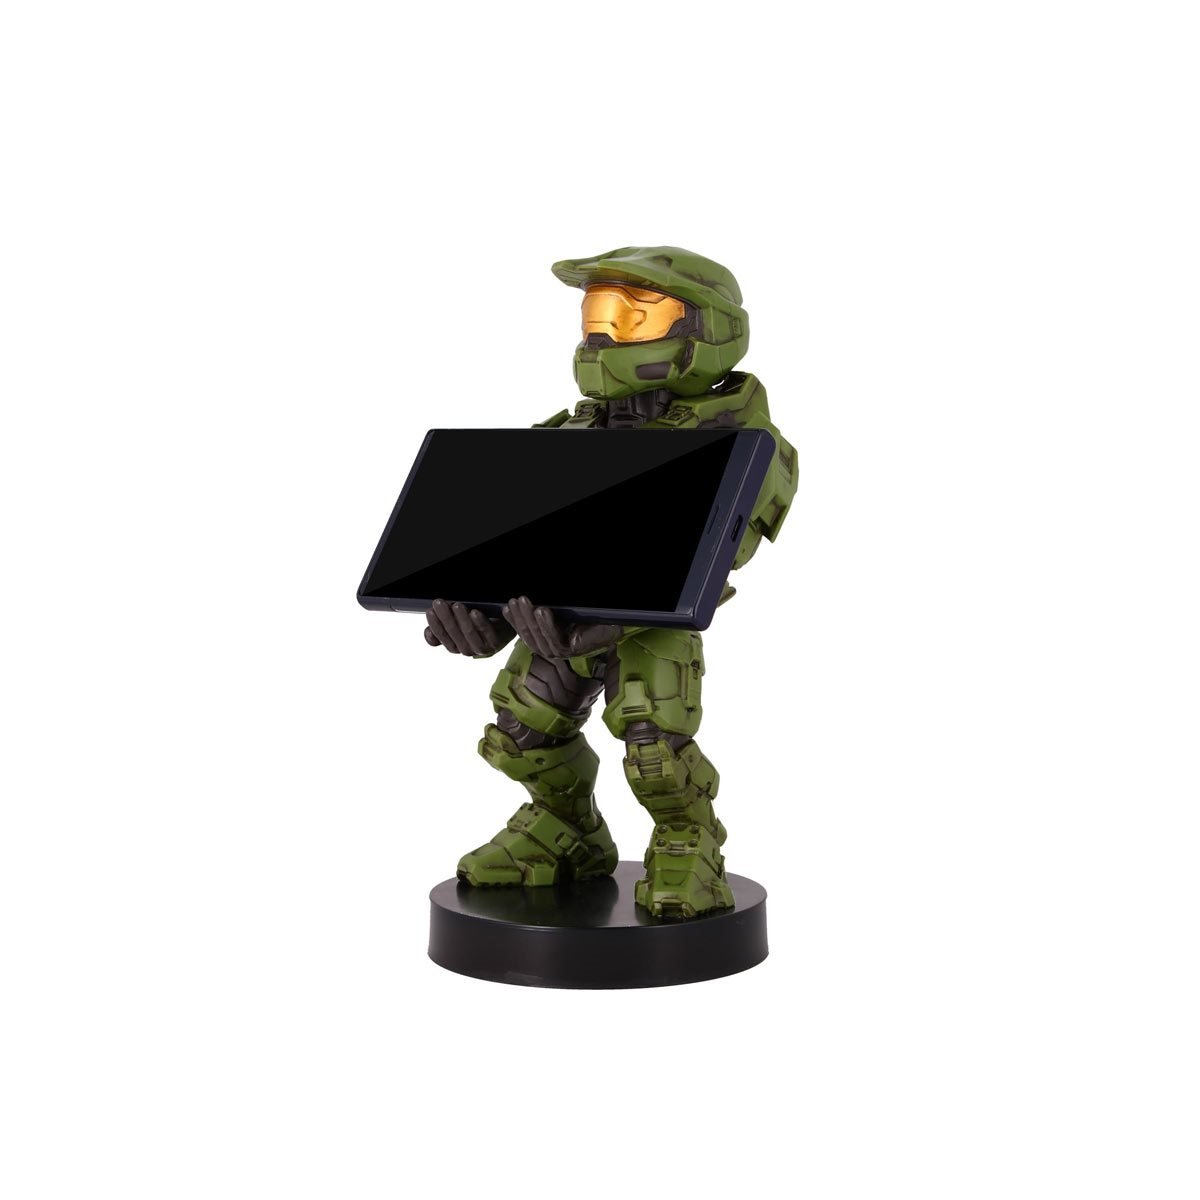 Halo Infinite Master Chief Cable Guy Controller Holder by Exquisite Gaming -Exquisite Gaming - India - www.superherotoystore.com